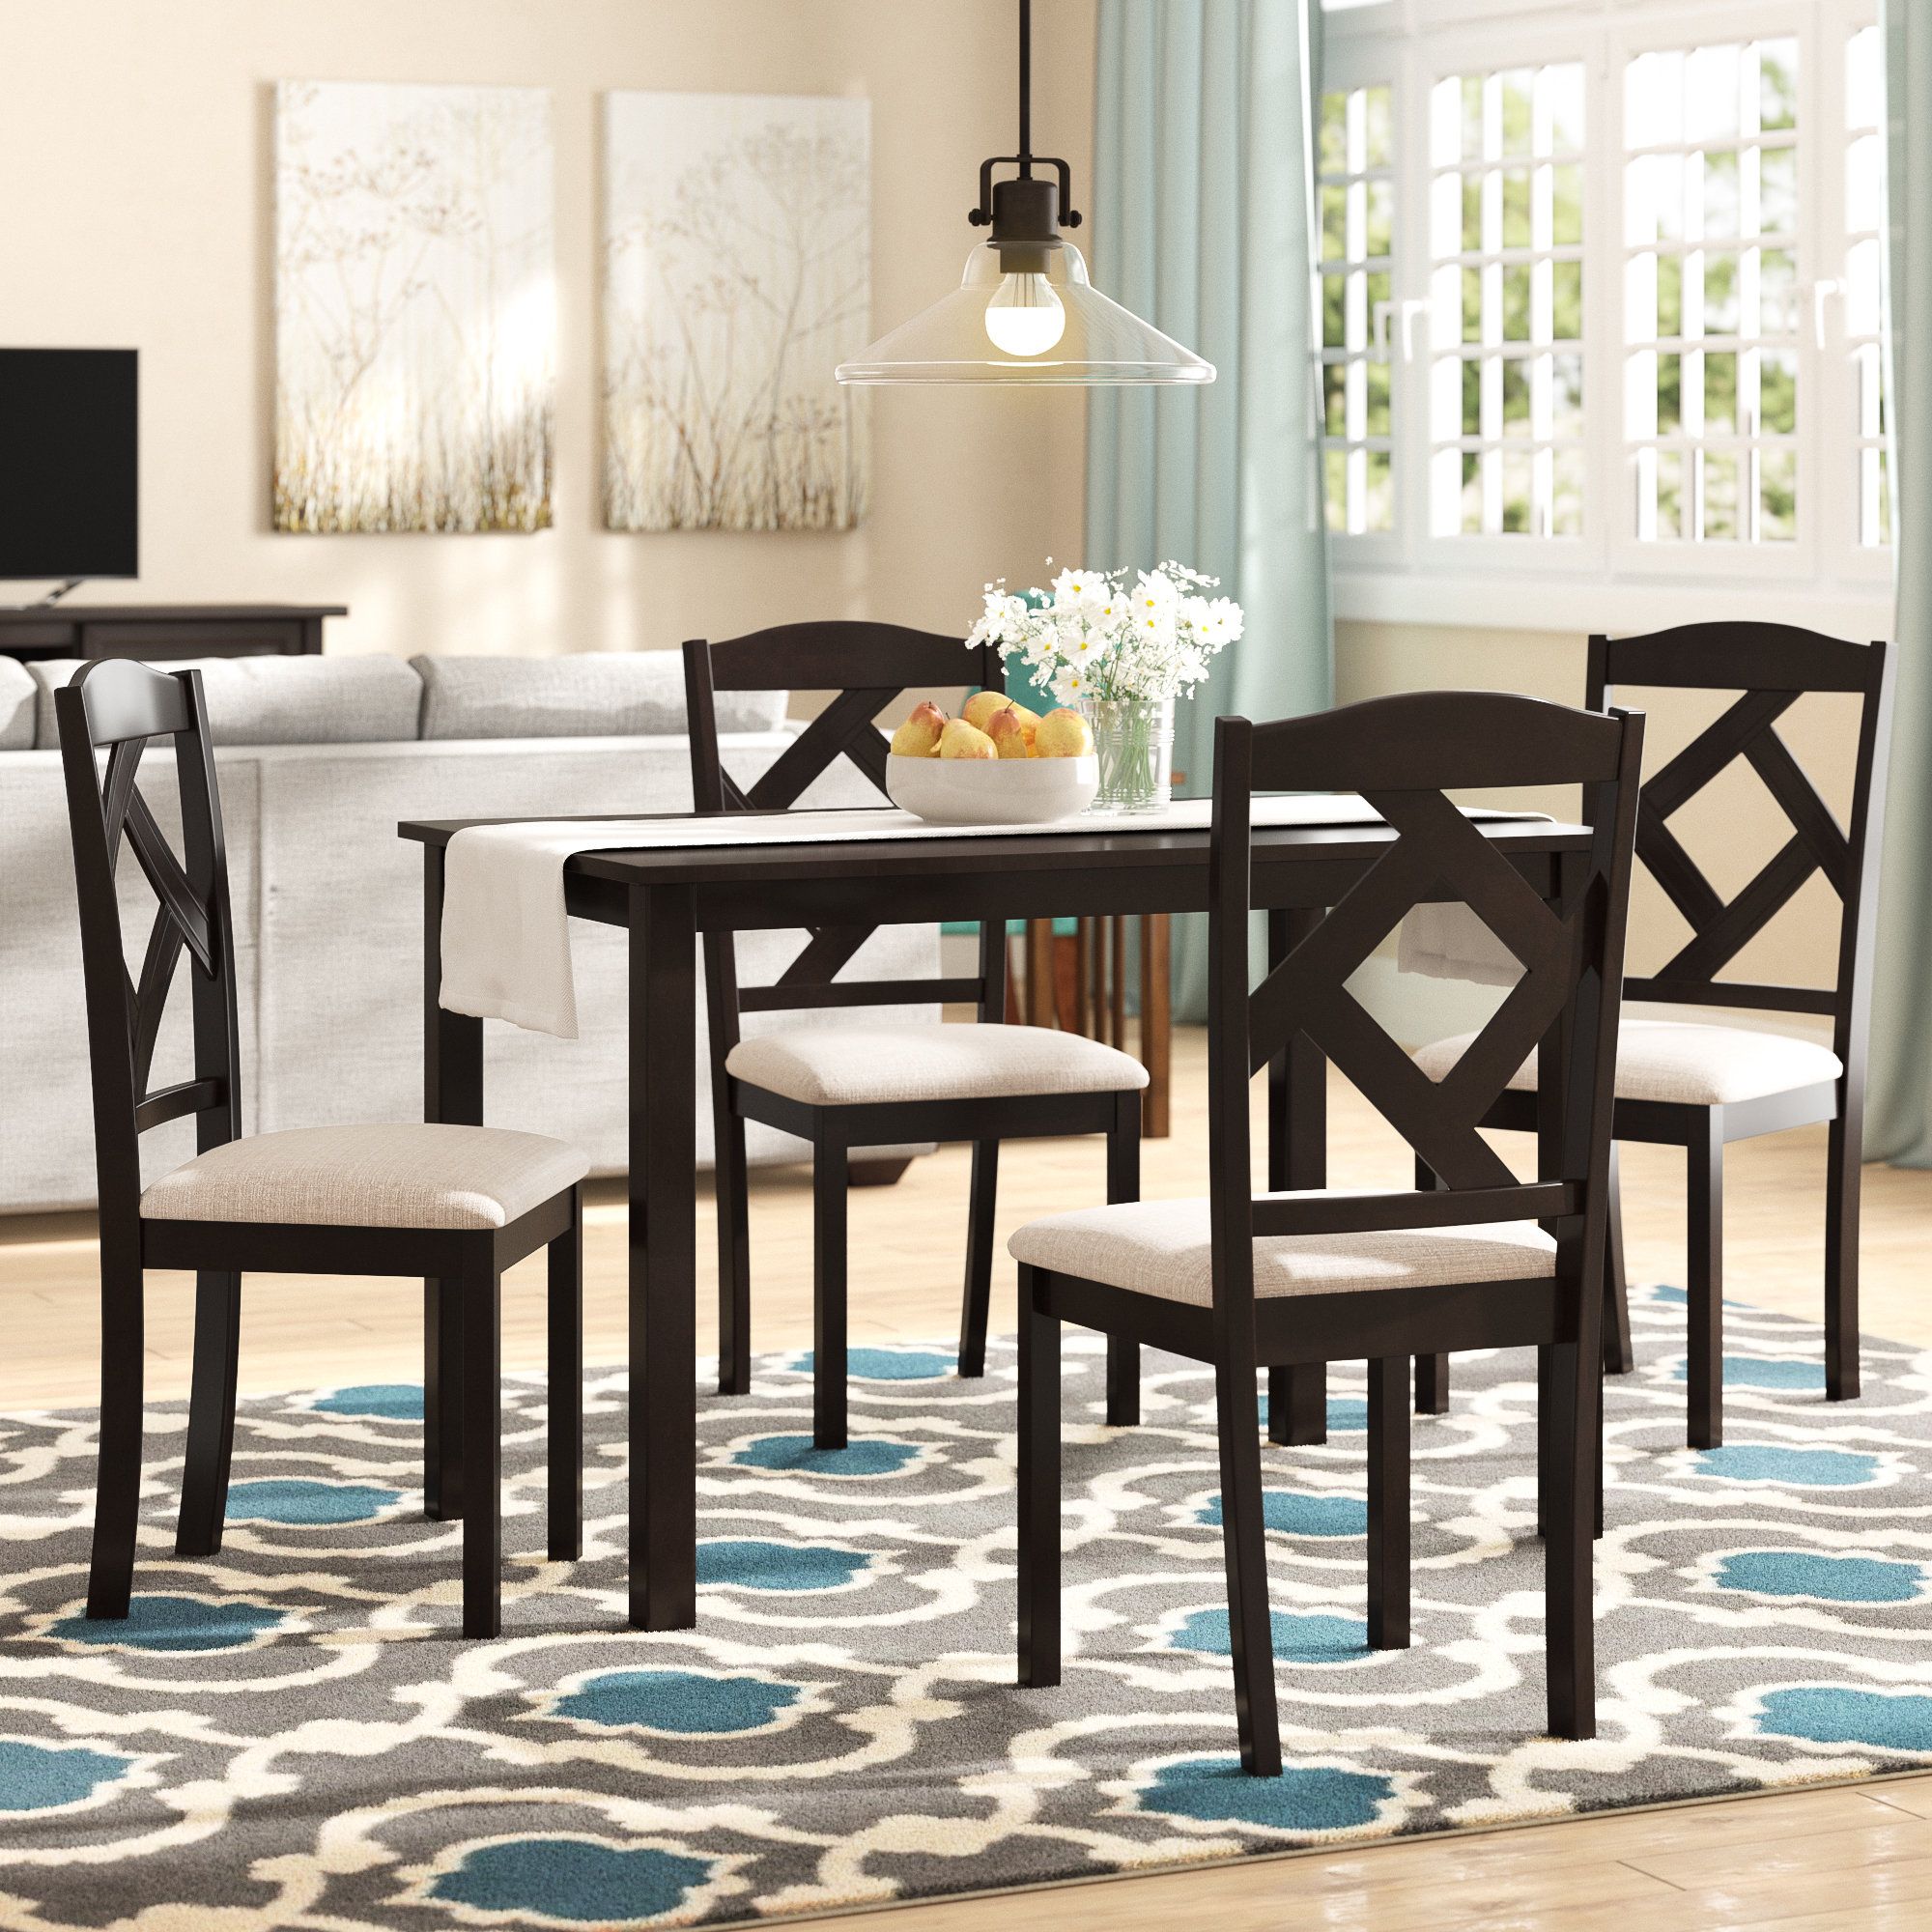 Goosman Modern And Contemporary 5 Piece Breakfast Nook Dining Set Within Widely Used 5 Piece Breakfast Nook Dining Sets (Photo 1 of 20)